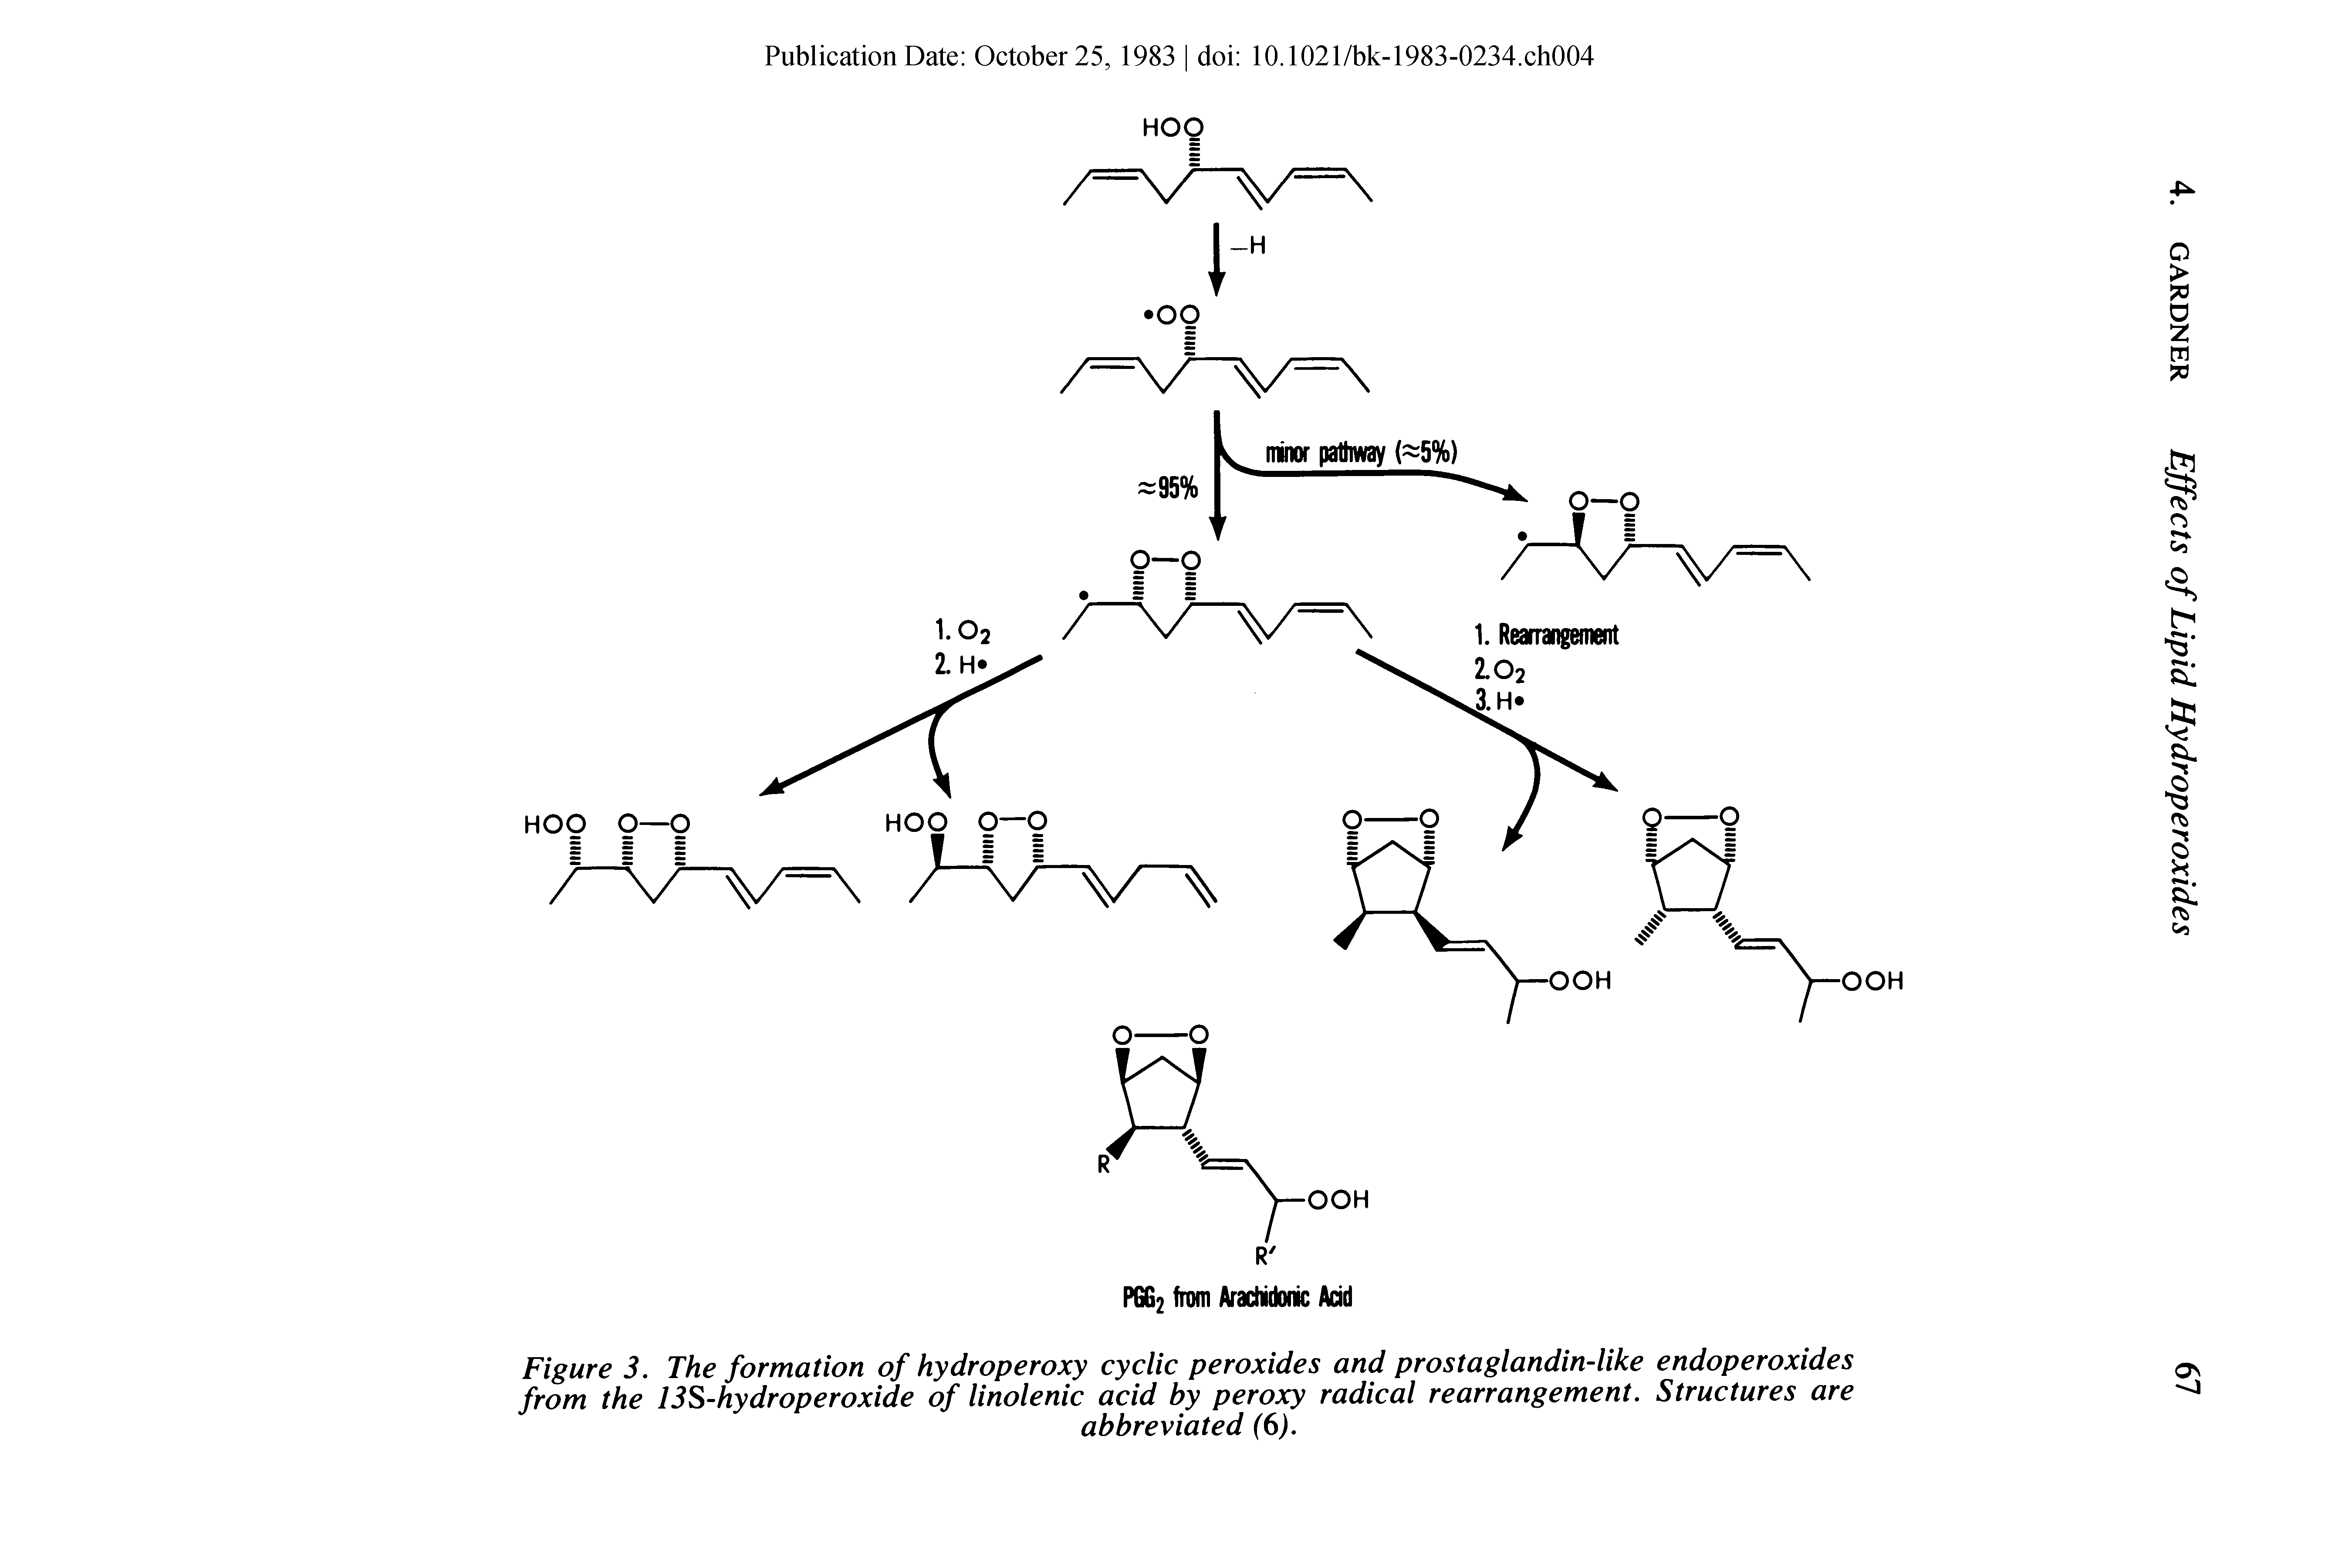 Figure 3. The formation of hydroperoxy cyclic peroxides and prostaglandin-like endoperoxides from the 13S-hydroperoxide of linolenic acid by peroxy radical rearrangement. Structures are...